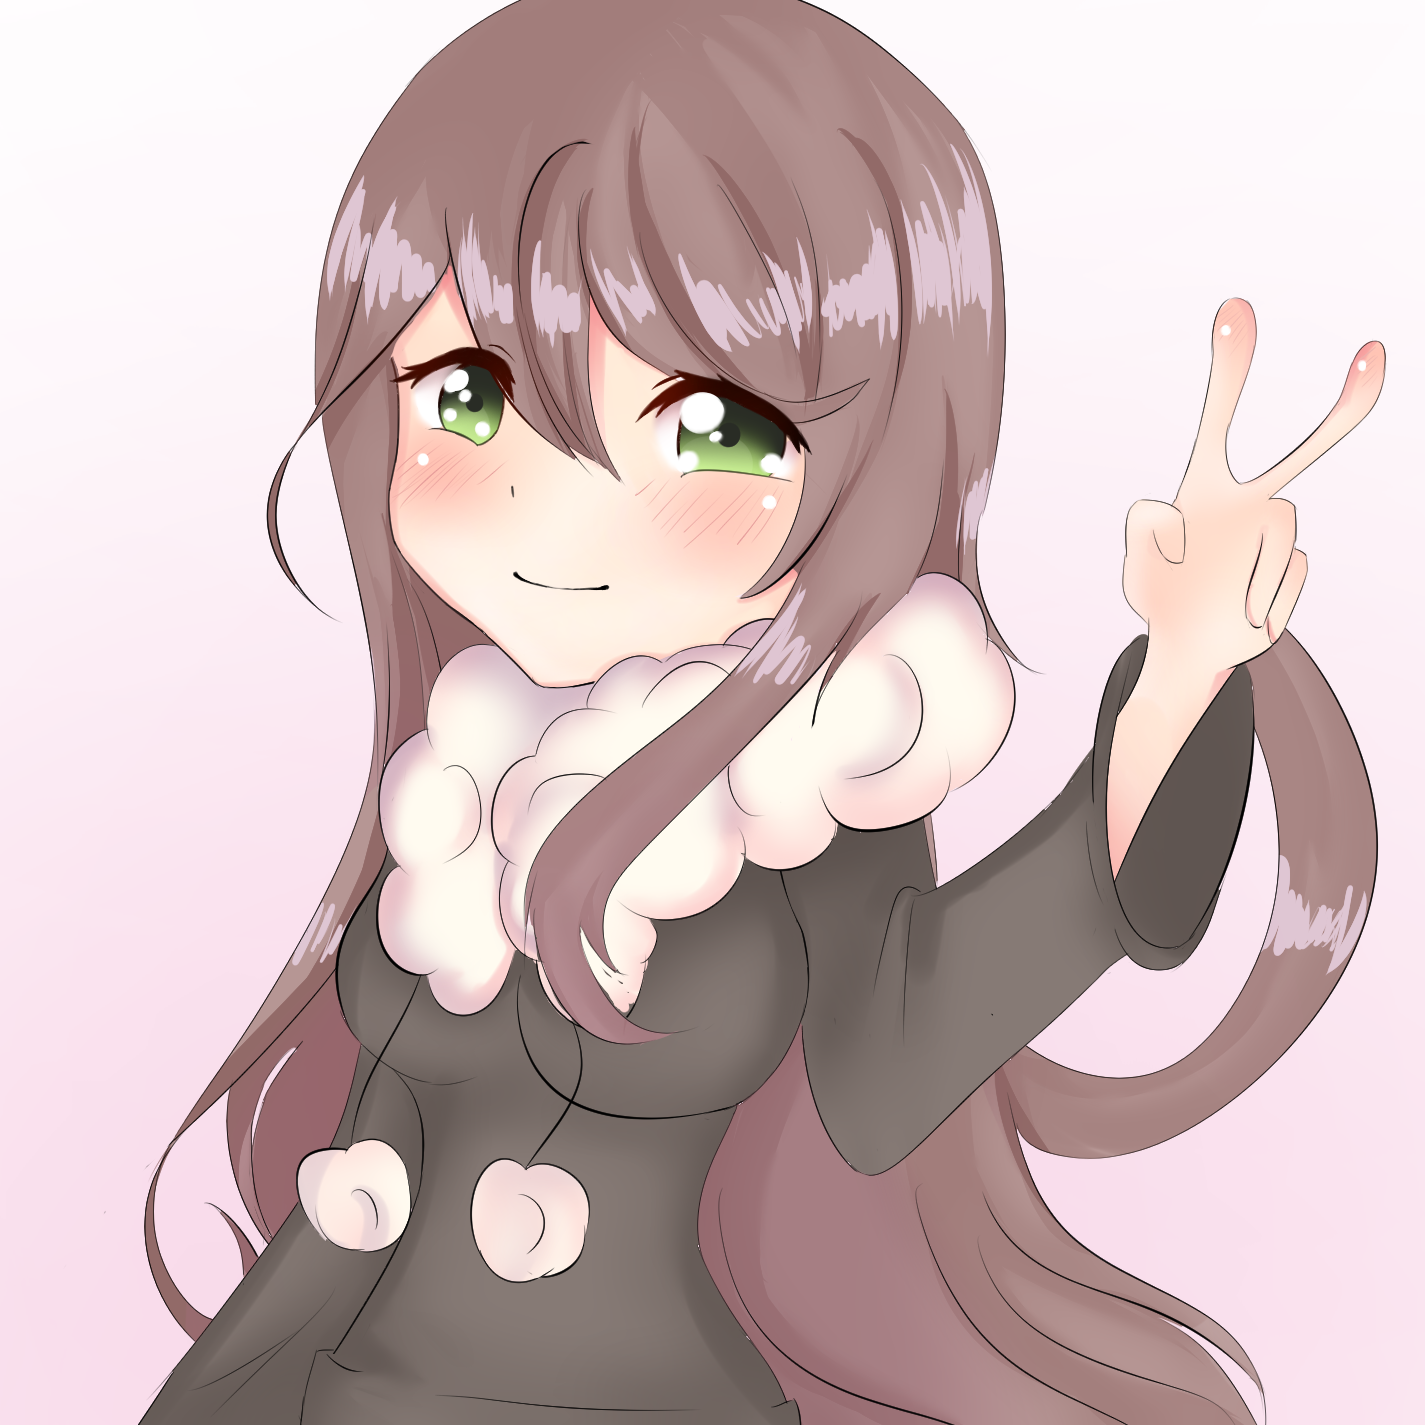 anime girl peace sign by TombieFox on DeviantArt